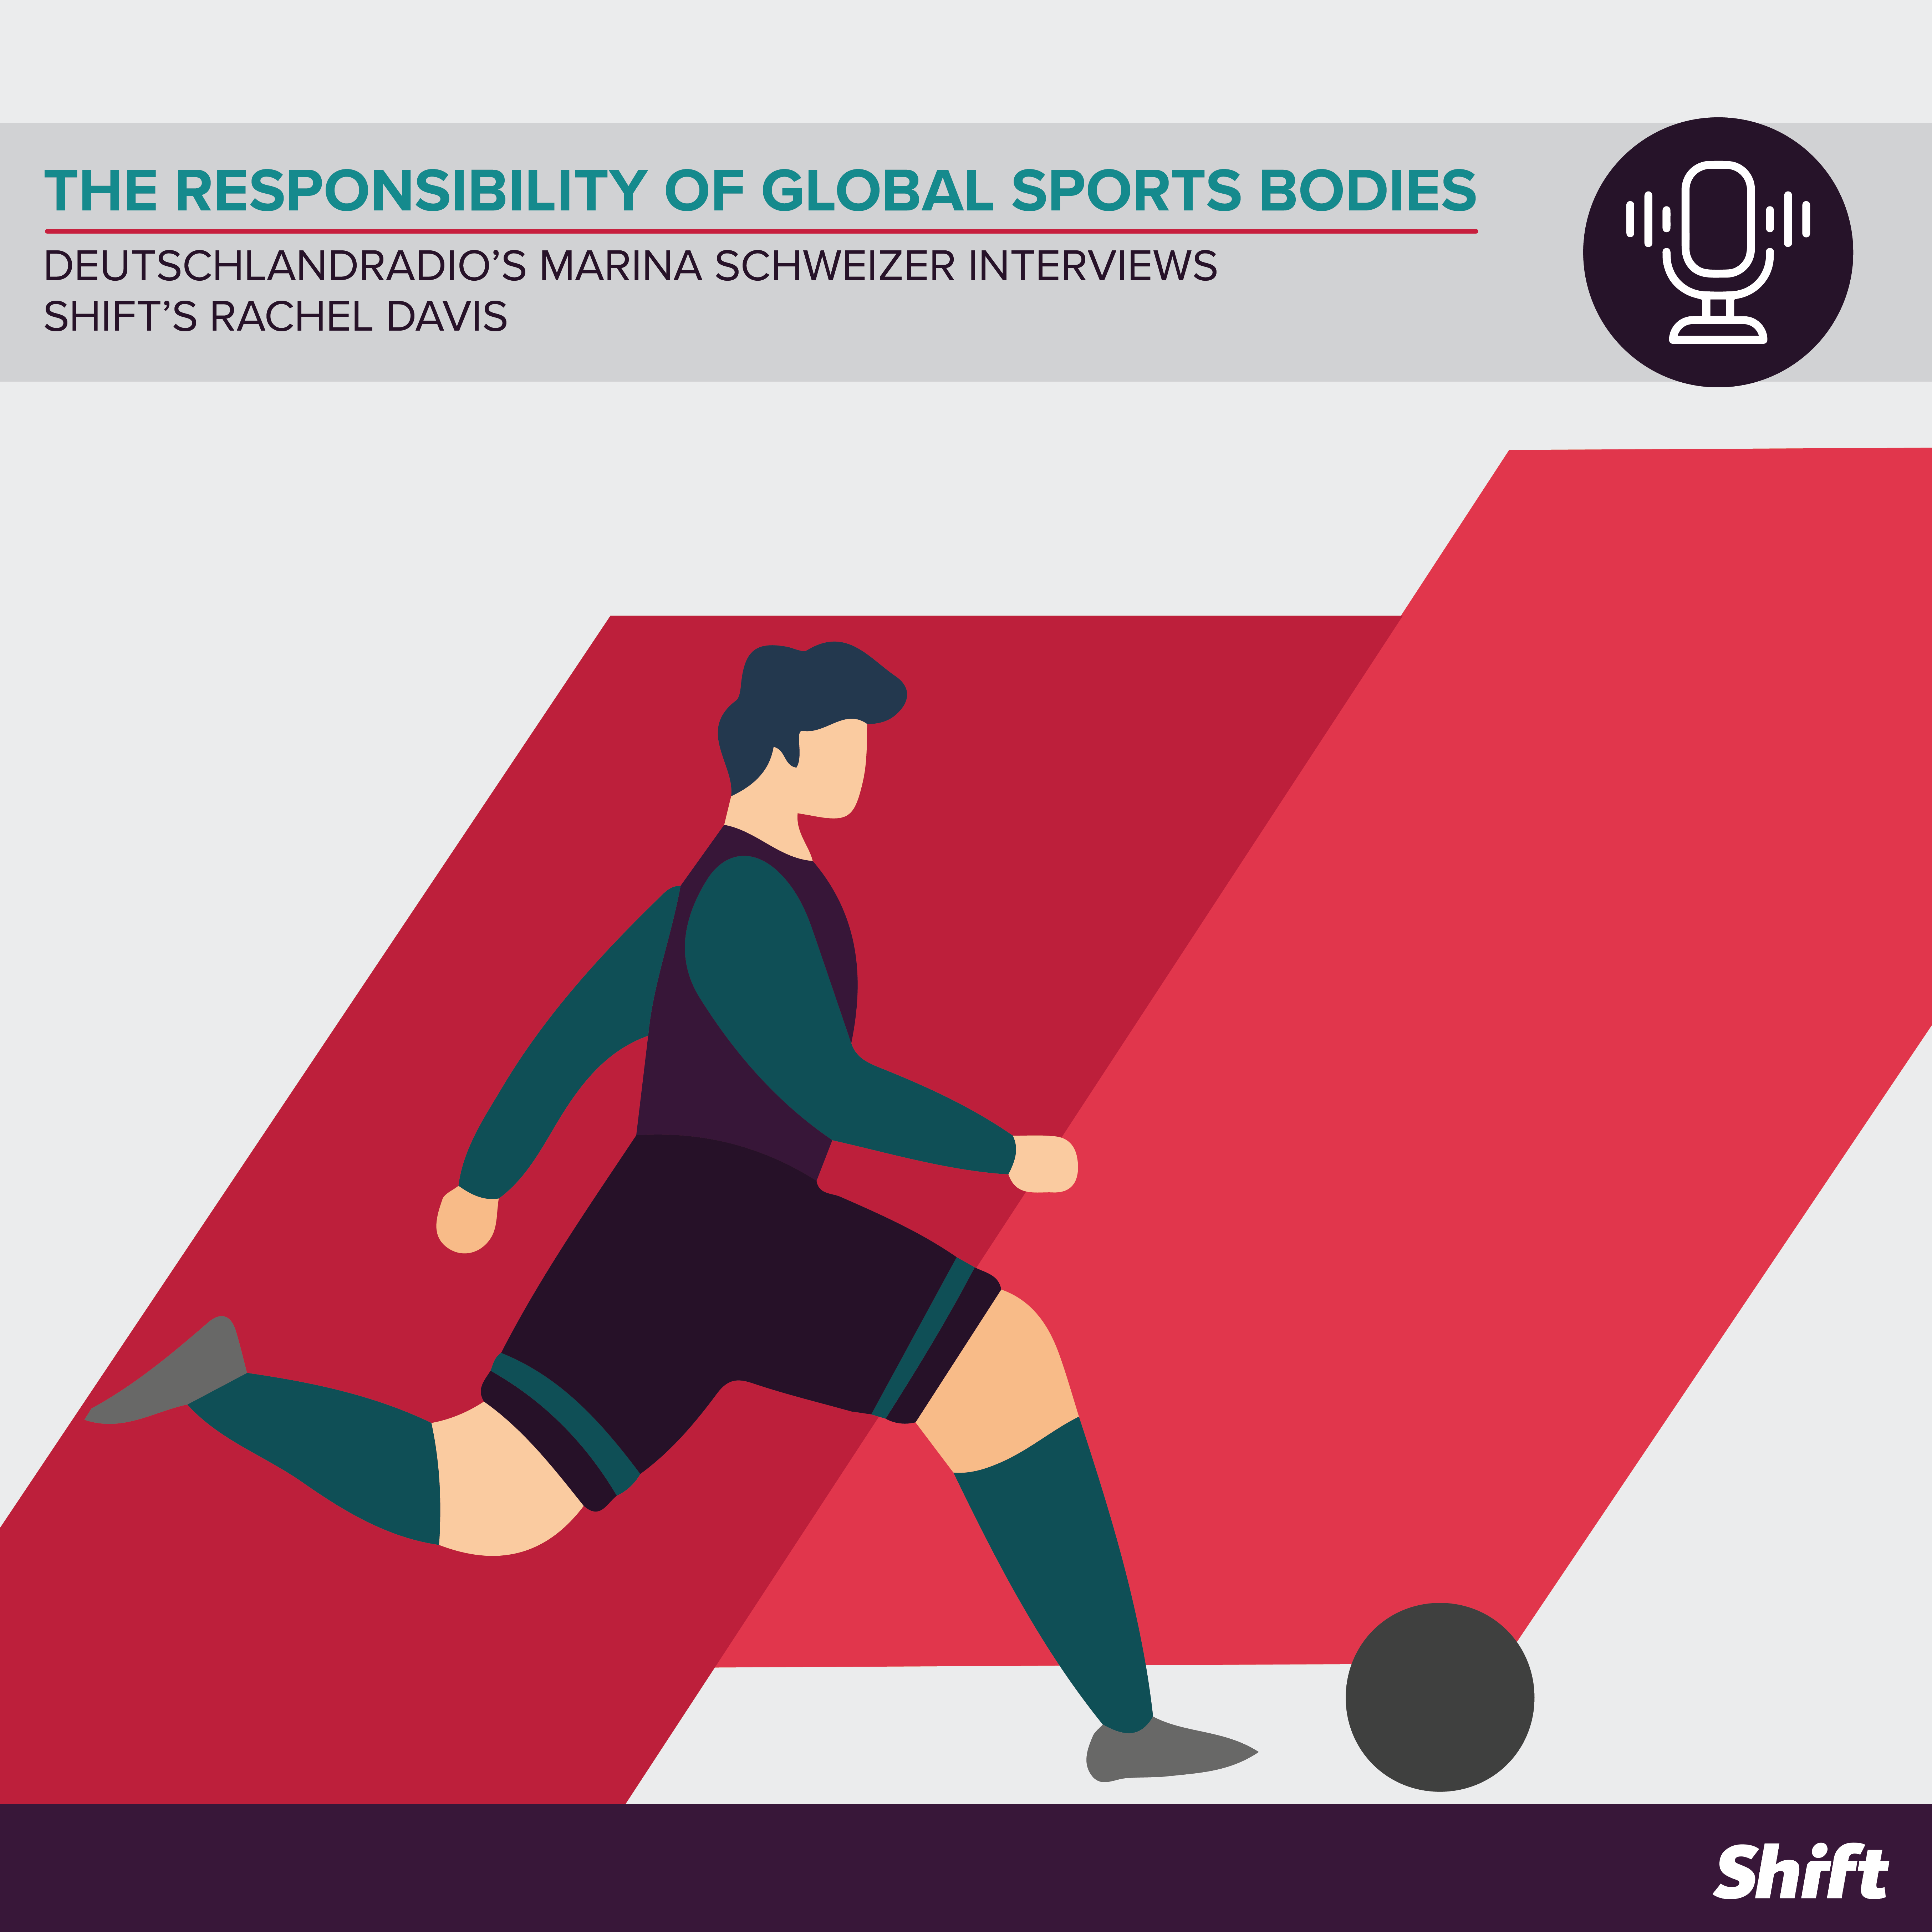 Shift’s Rachel Davis on the Responsibility of Global Sports Bodies to Respect Human Rights when hosting Mega Sporting Events